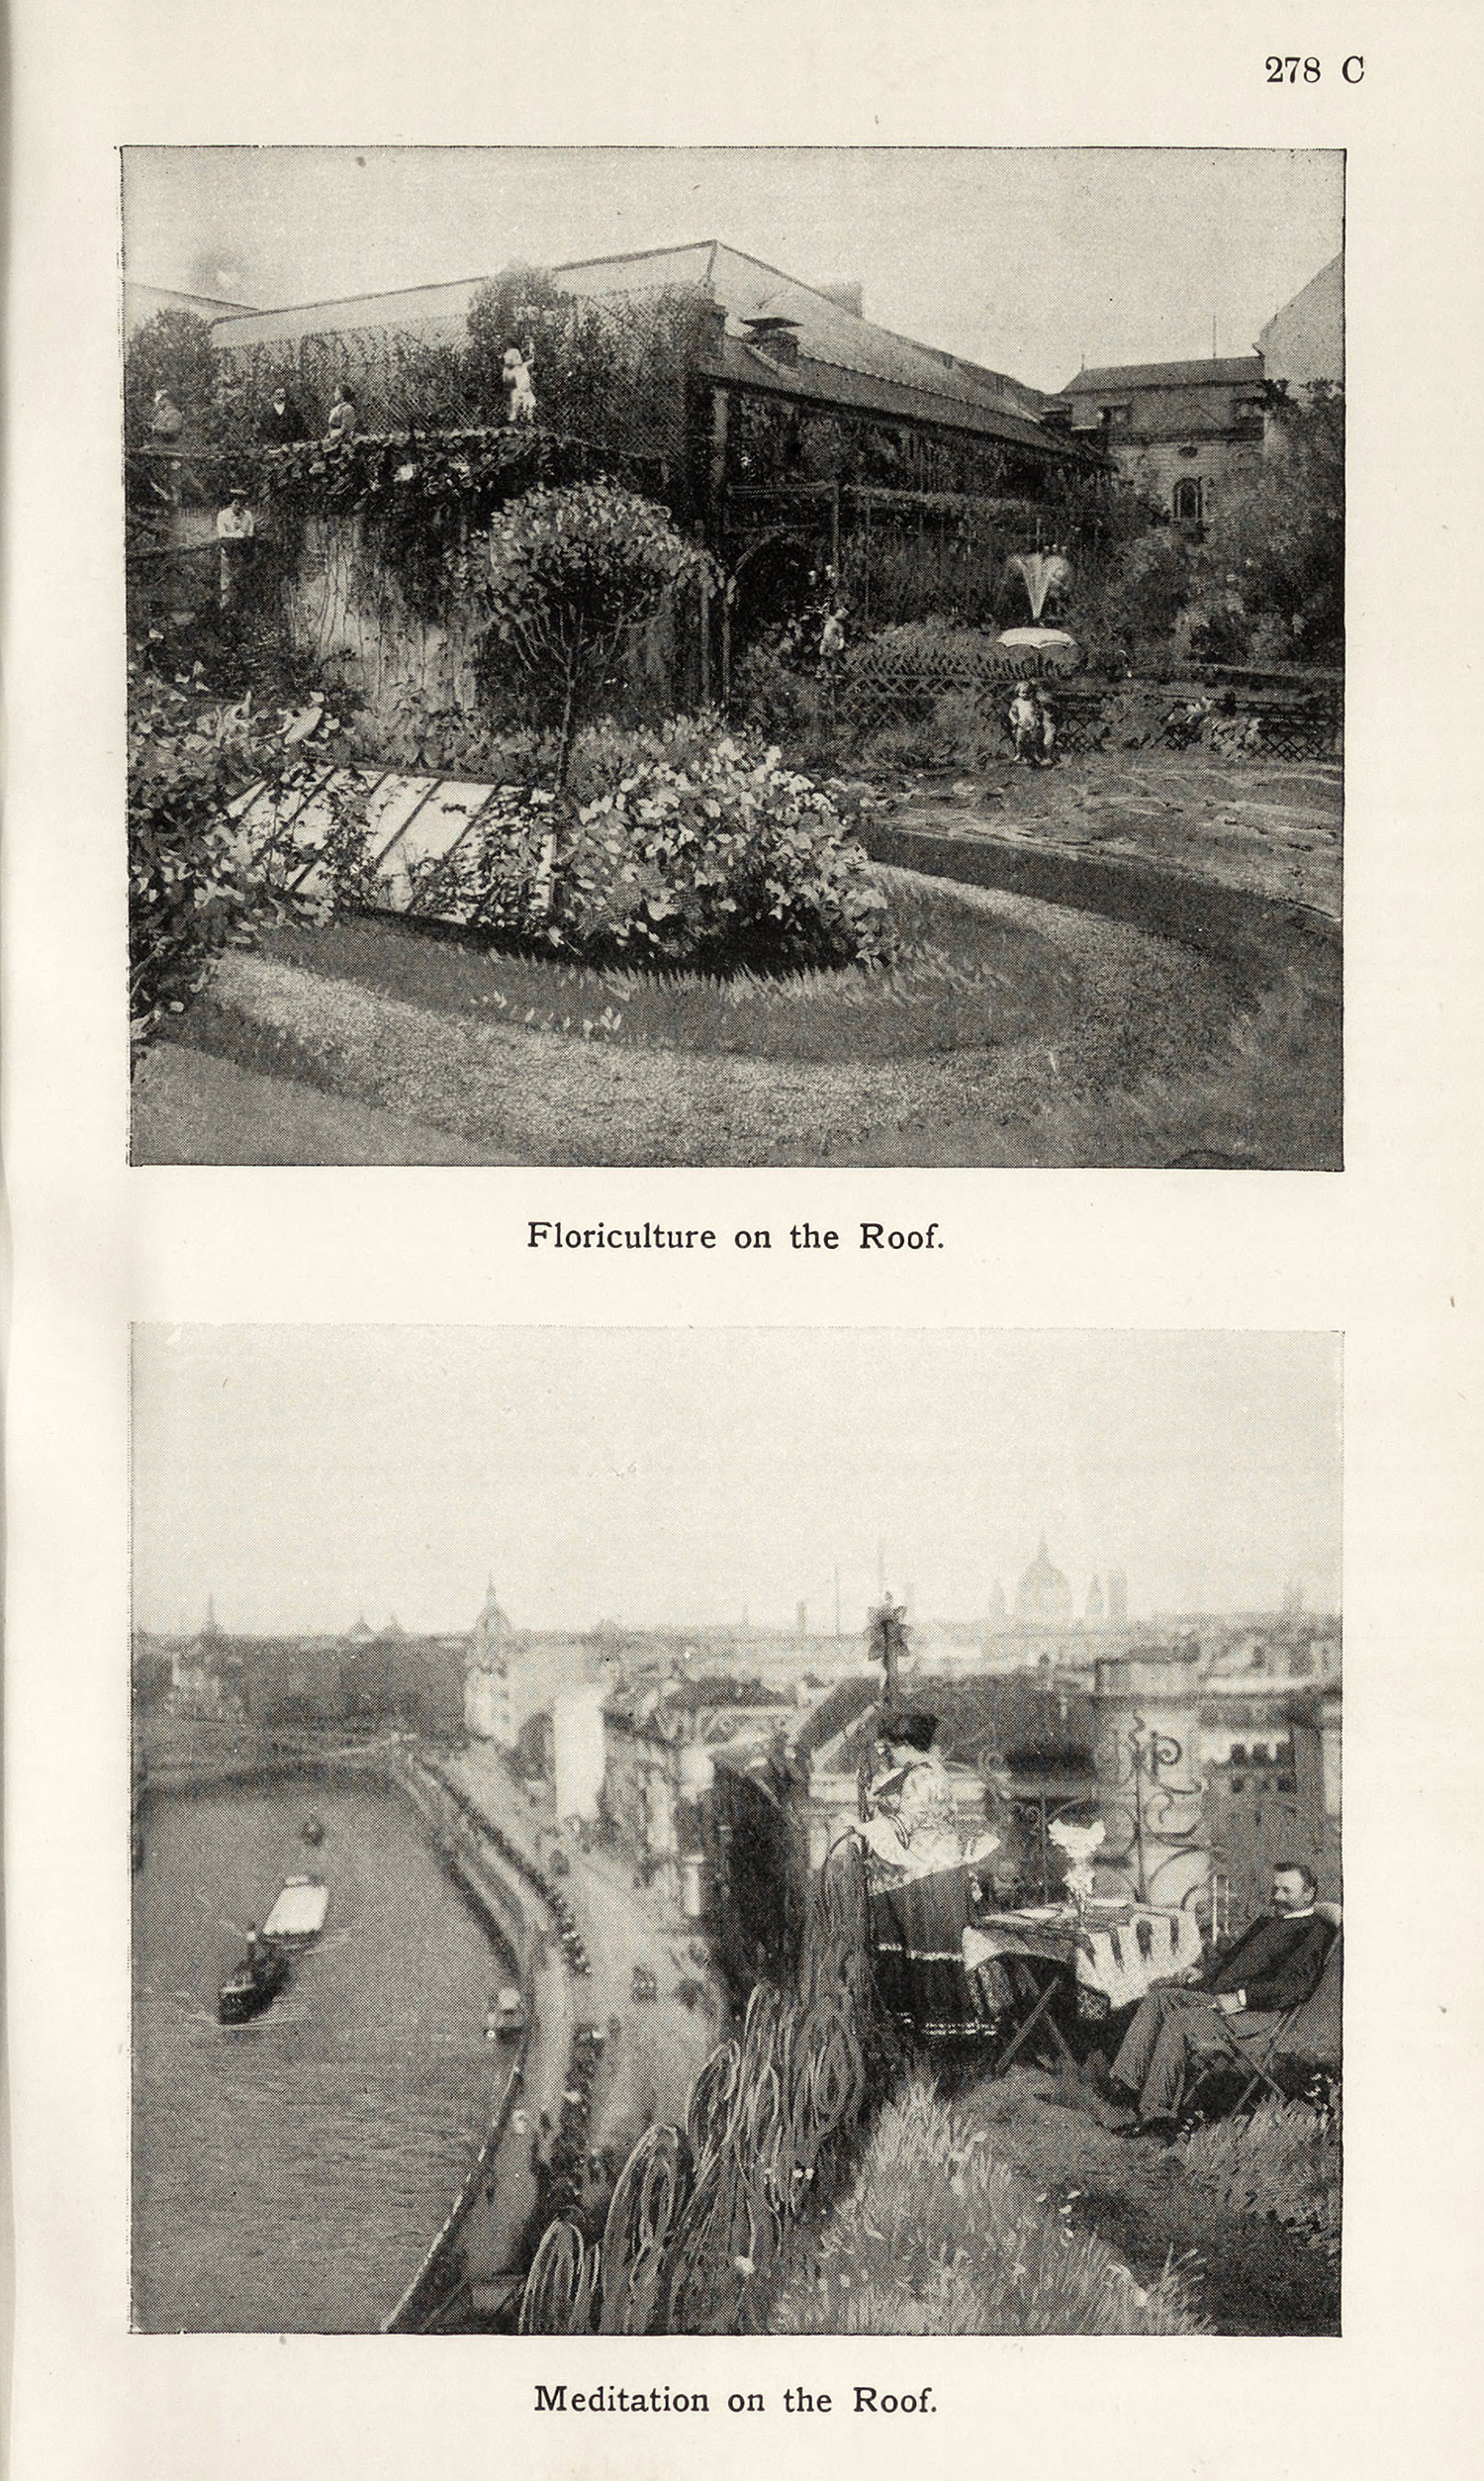 Abb-11_Alfred-Sennet-Garden-Cities-in-Theory-and-Practice-1905_278C